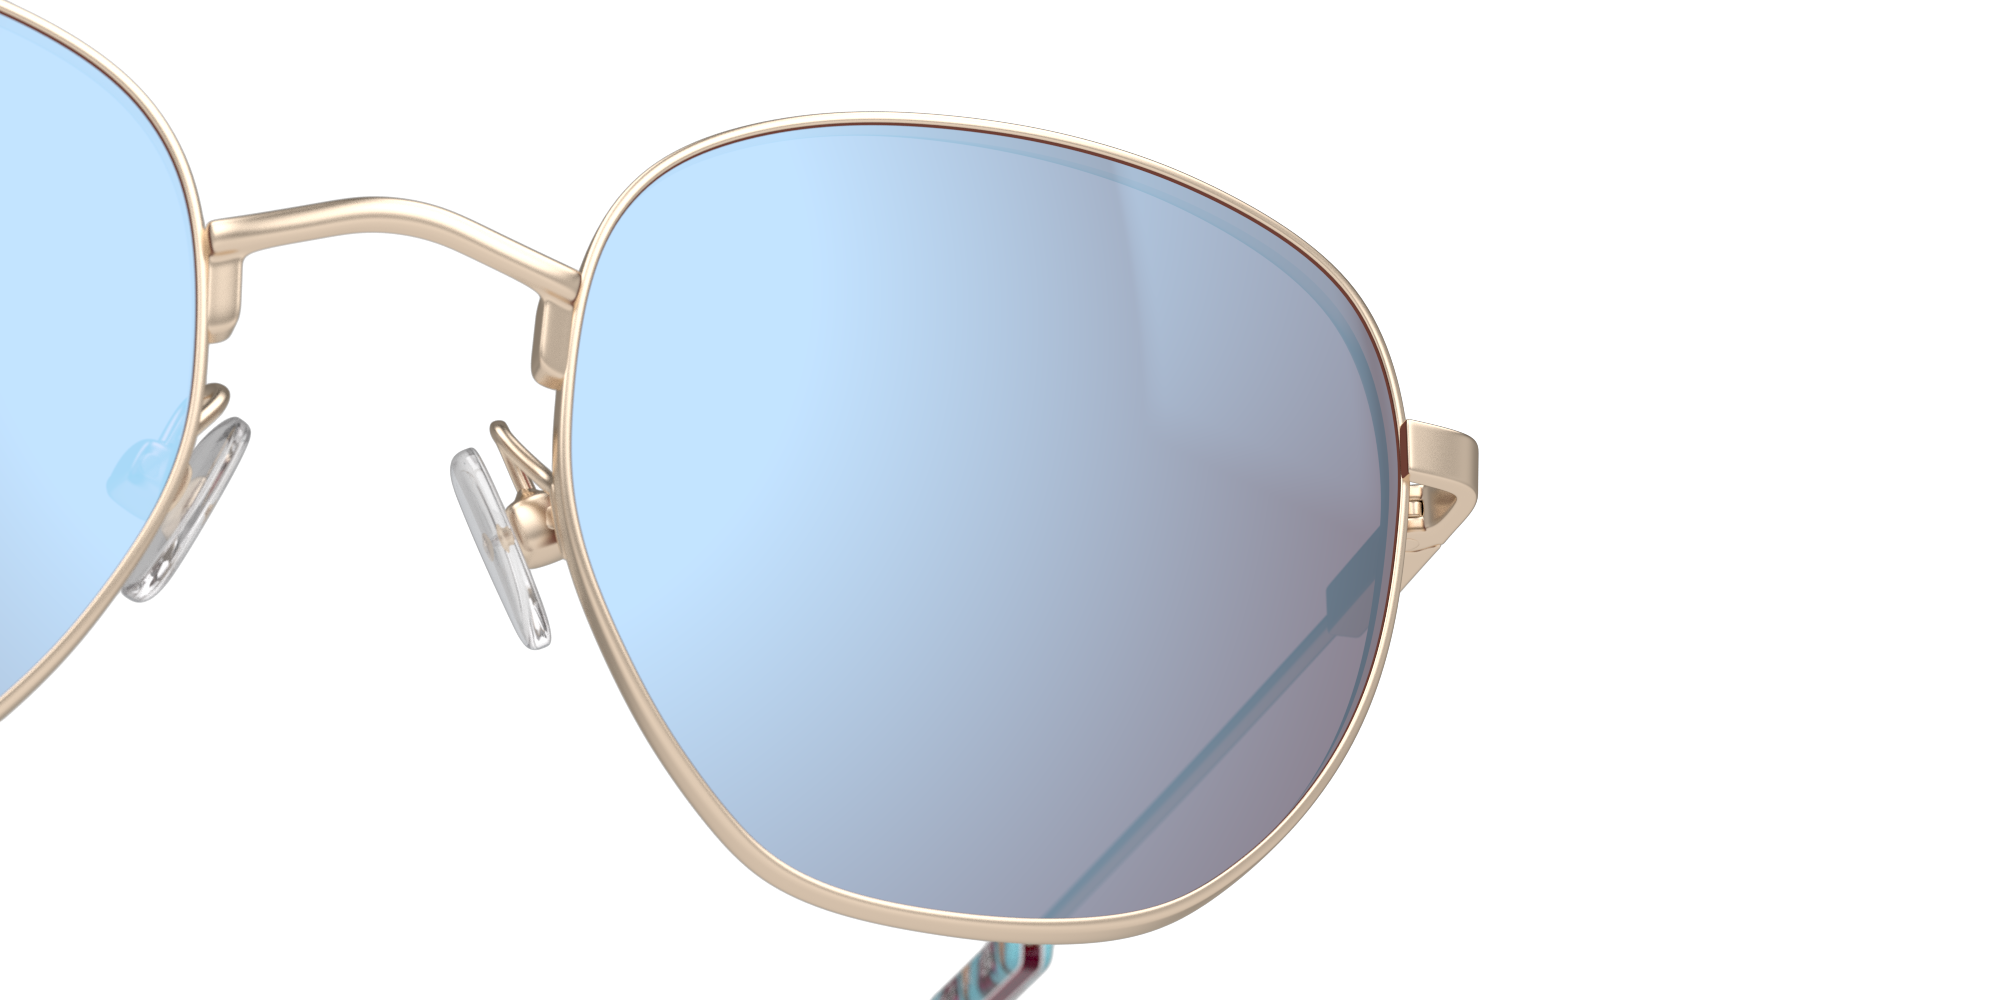 Detail01 Fortnite with Unofficial UNSU0155 Sunglasses Grey / Gold